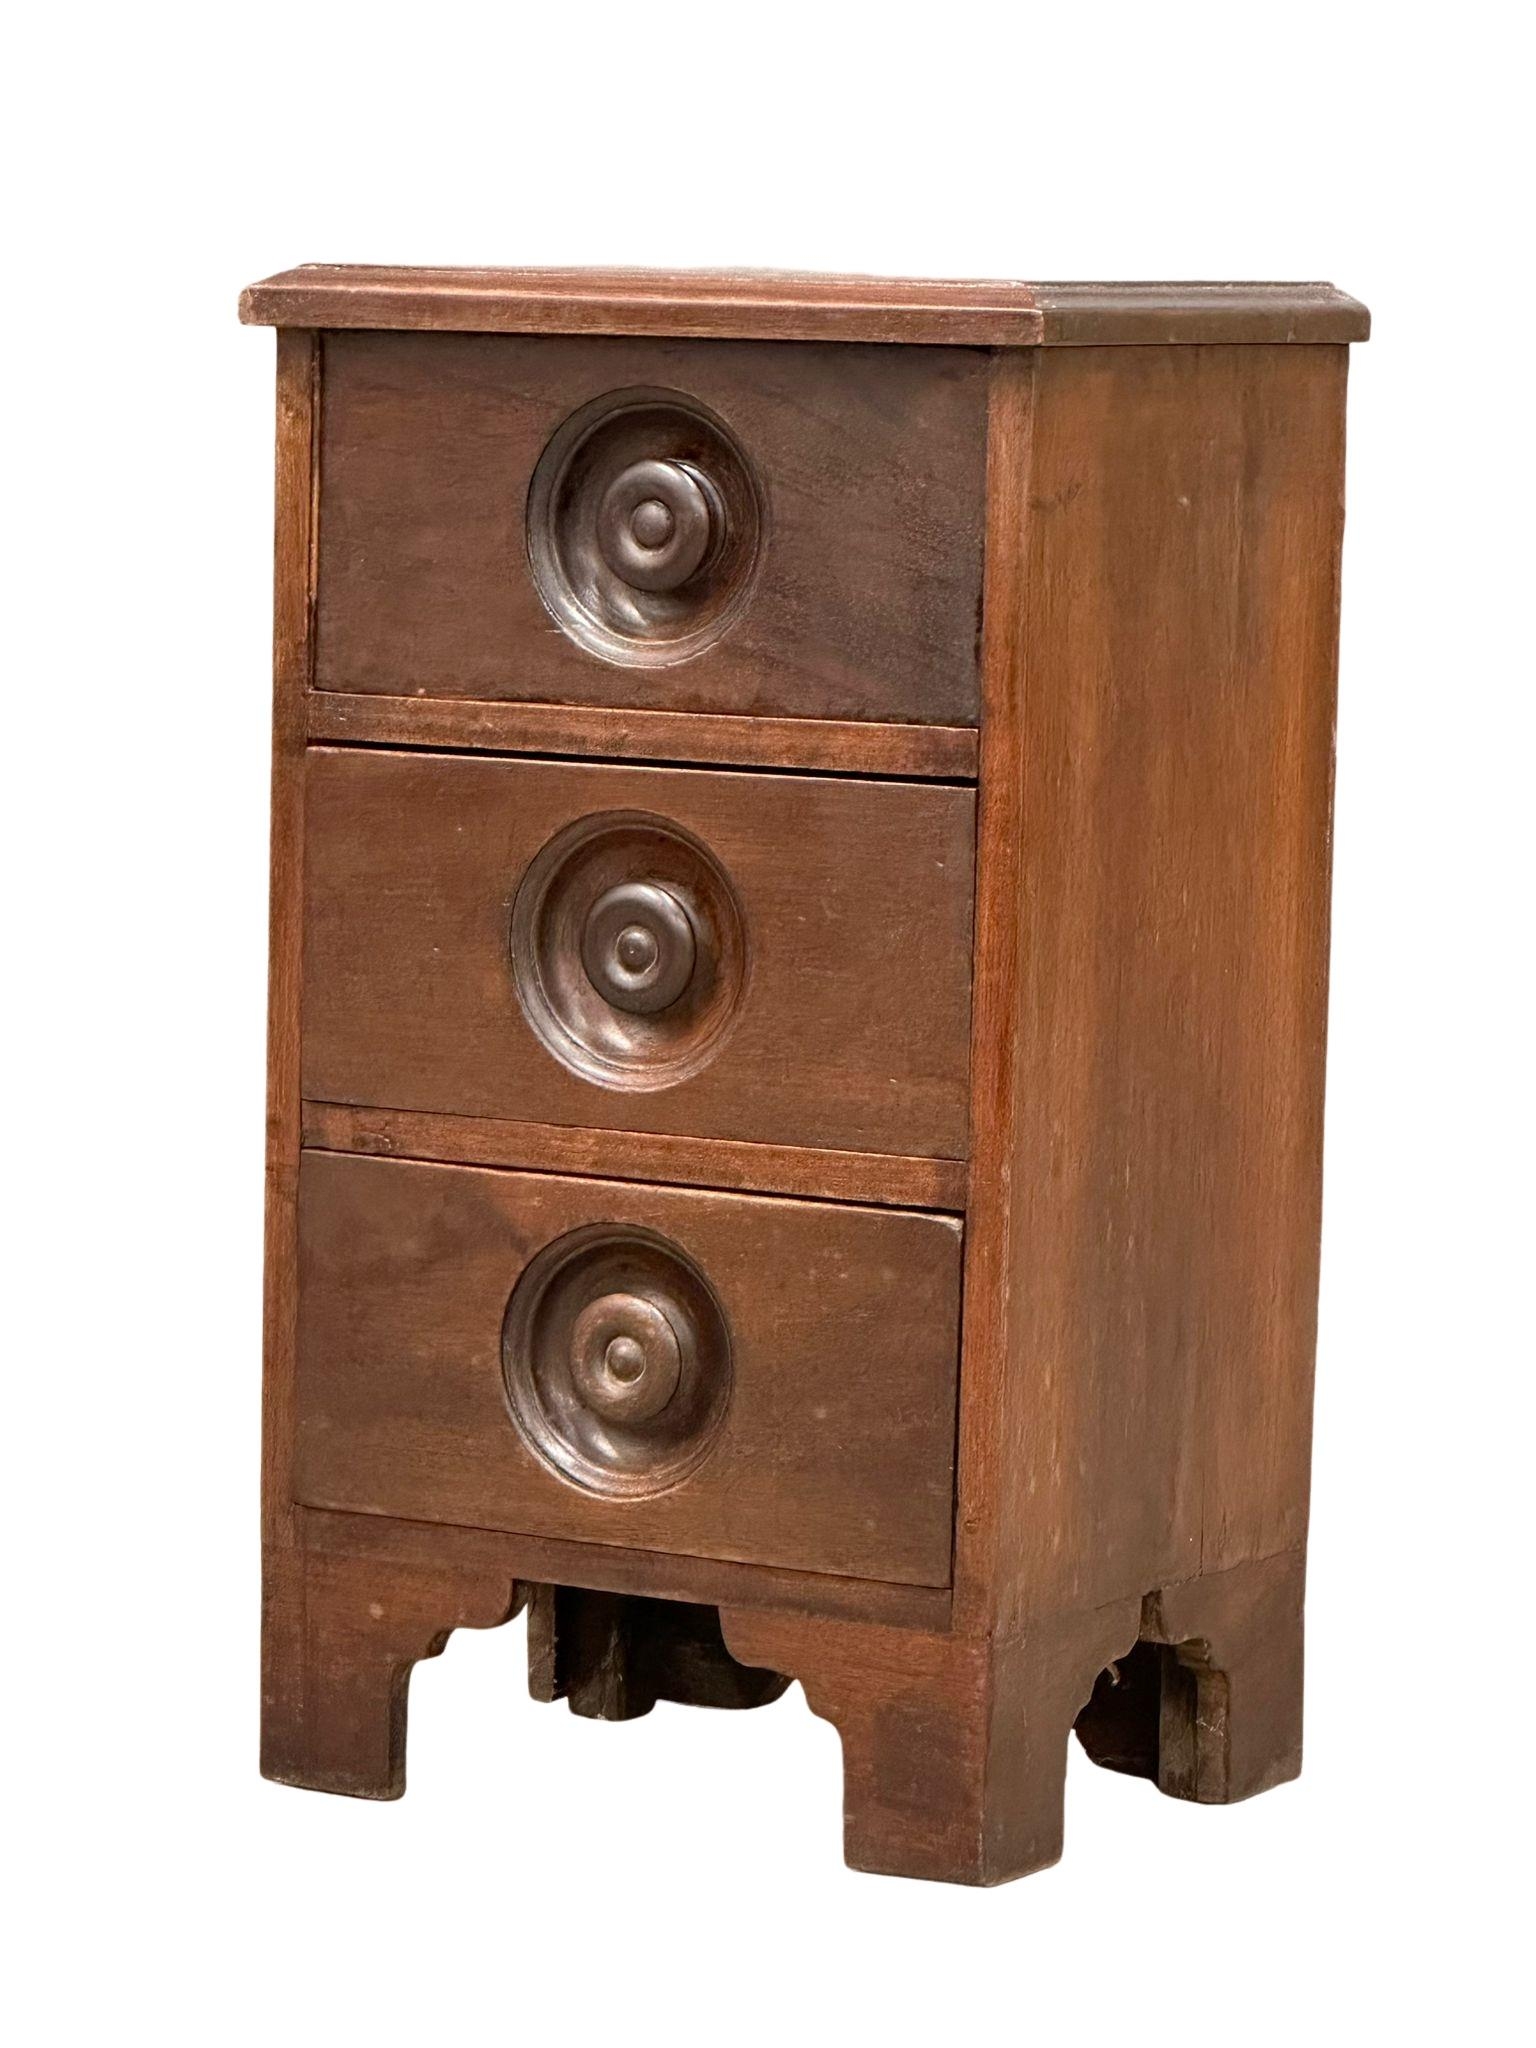 A small late 19th century Victorian mahogany chest of drawers. Circa 1860-1880. 32x25x55cm - Image 3 of 5